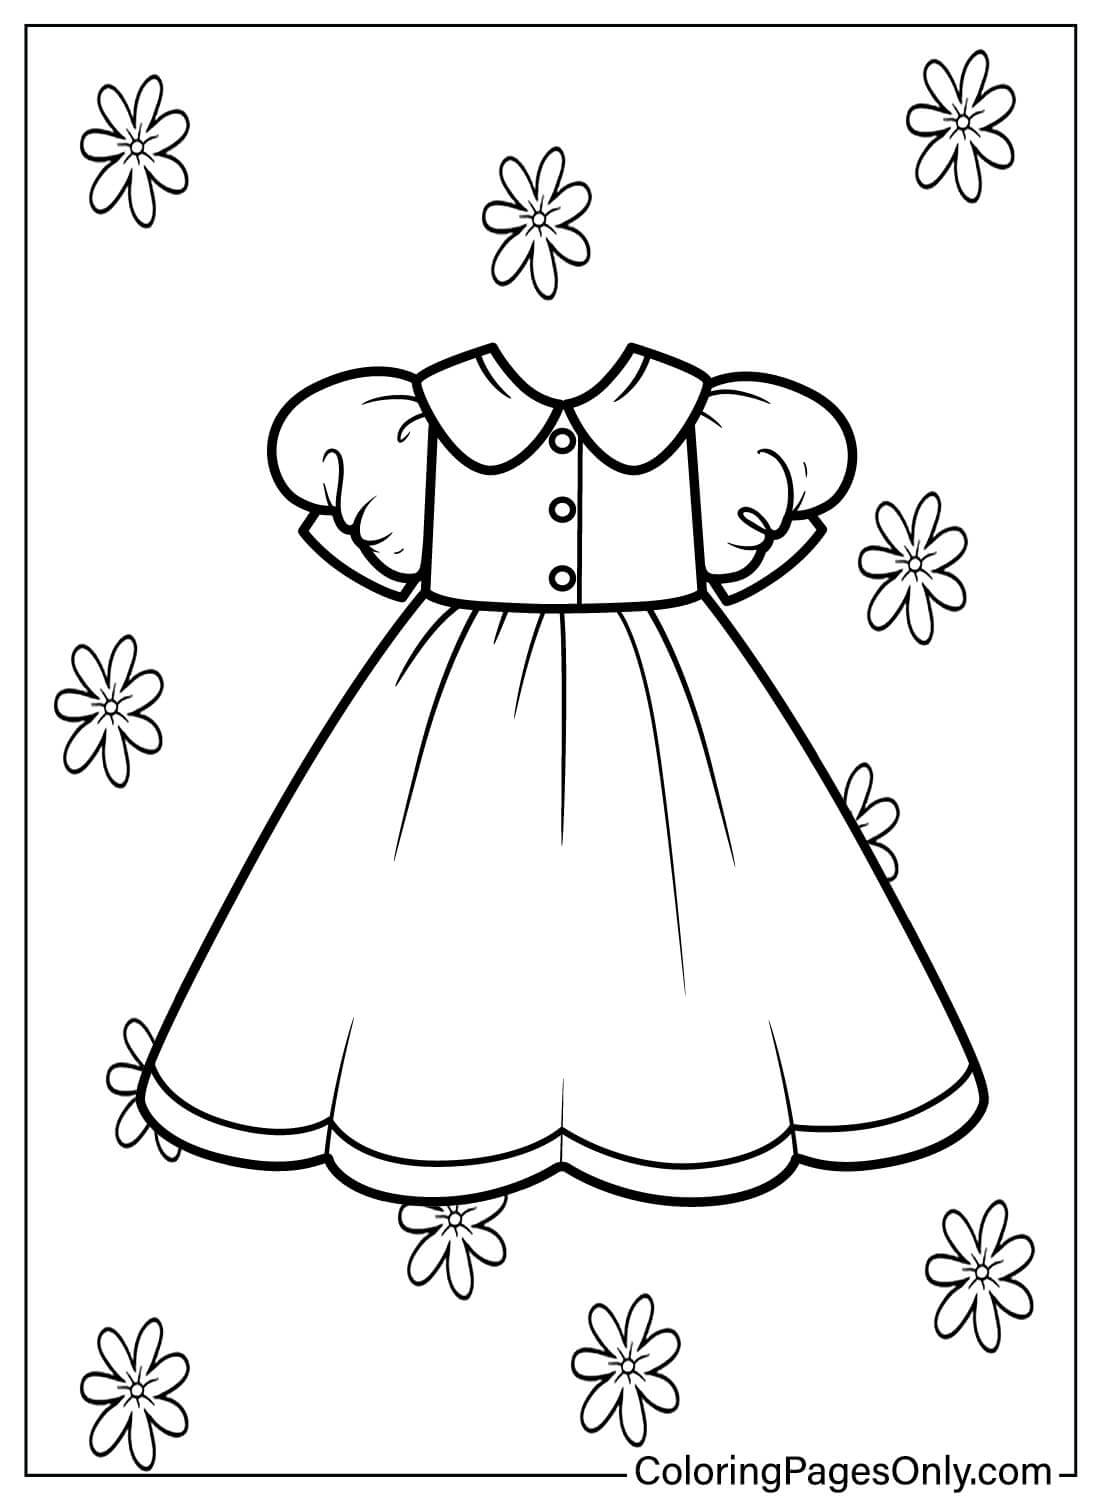 Coloring Sheet Baby Dress - Free Printable Coloring Pages